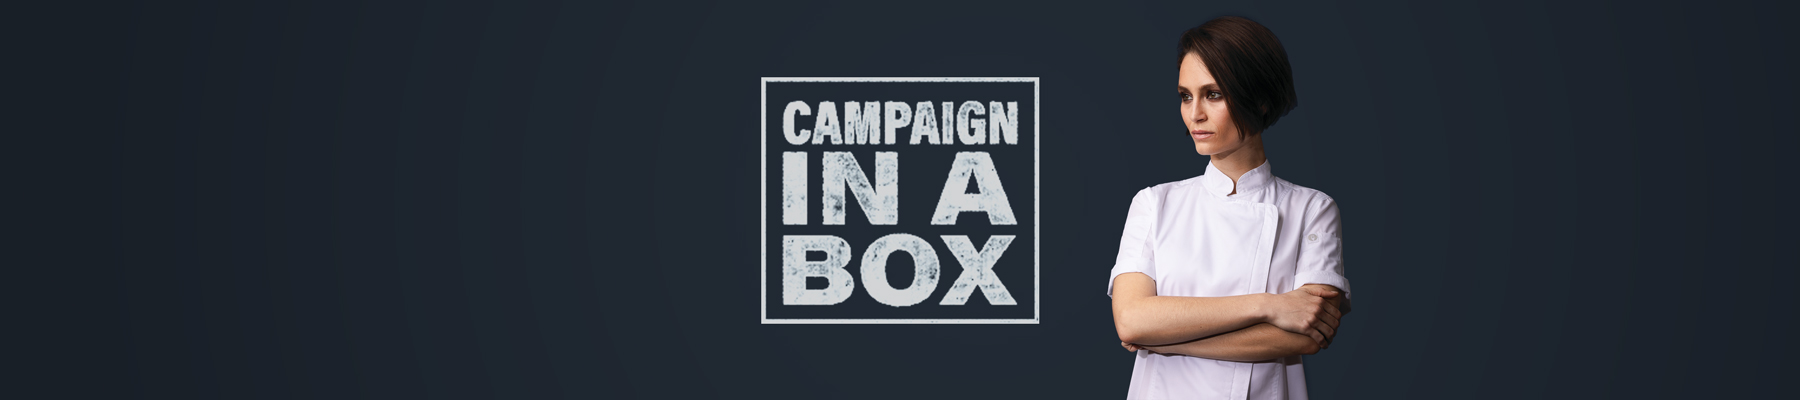 Campaign in a Box - Women's Collection  - Chef Works